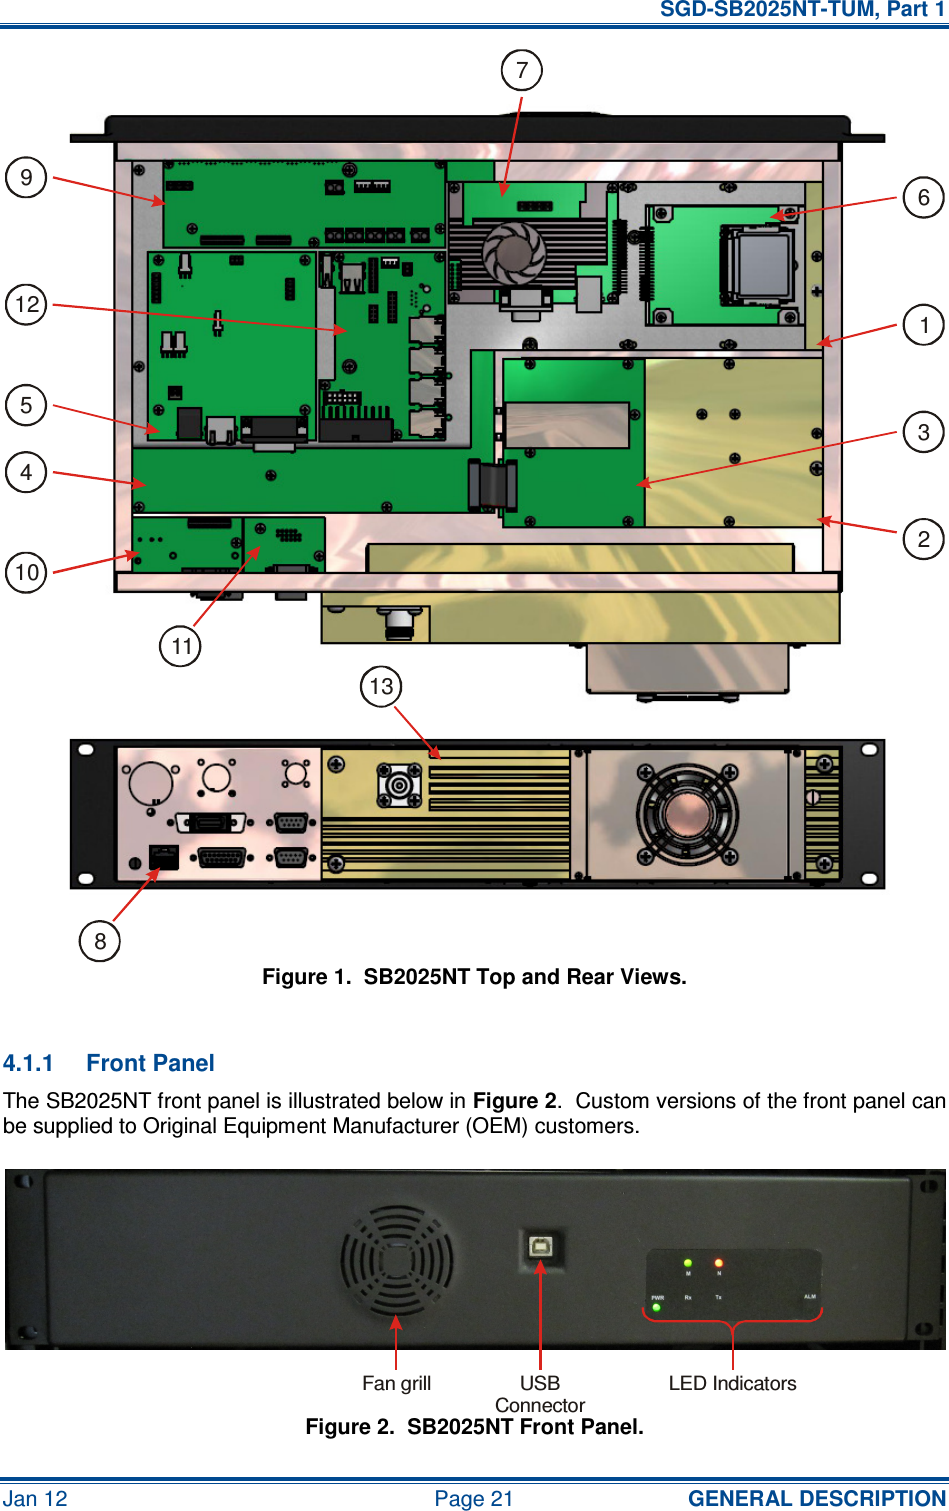   SGD-SB2025NT-TUM, Part 1 Jan 12  Page 21  GENERAL DESCRIPTION Figure 1.  SB2025NT Top and Rear Views.  4.1.1  Front Panel The SB2025NT front panel is illustrated below in Figure 2.  Custom versions of the front panel can be supplied to Original Equipment Manufacturer (OEM) customers. Figure 2.  SB2025NT Front Panel. 12345678910111213LED IndicatorsUSBConnectorFan grill